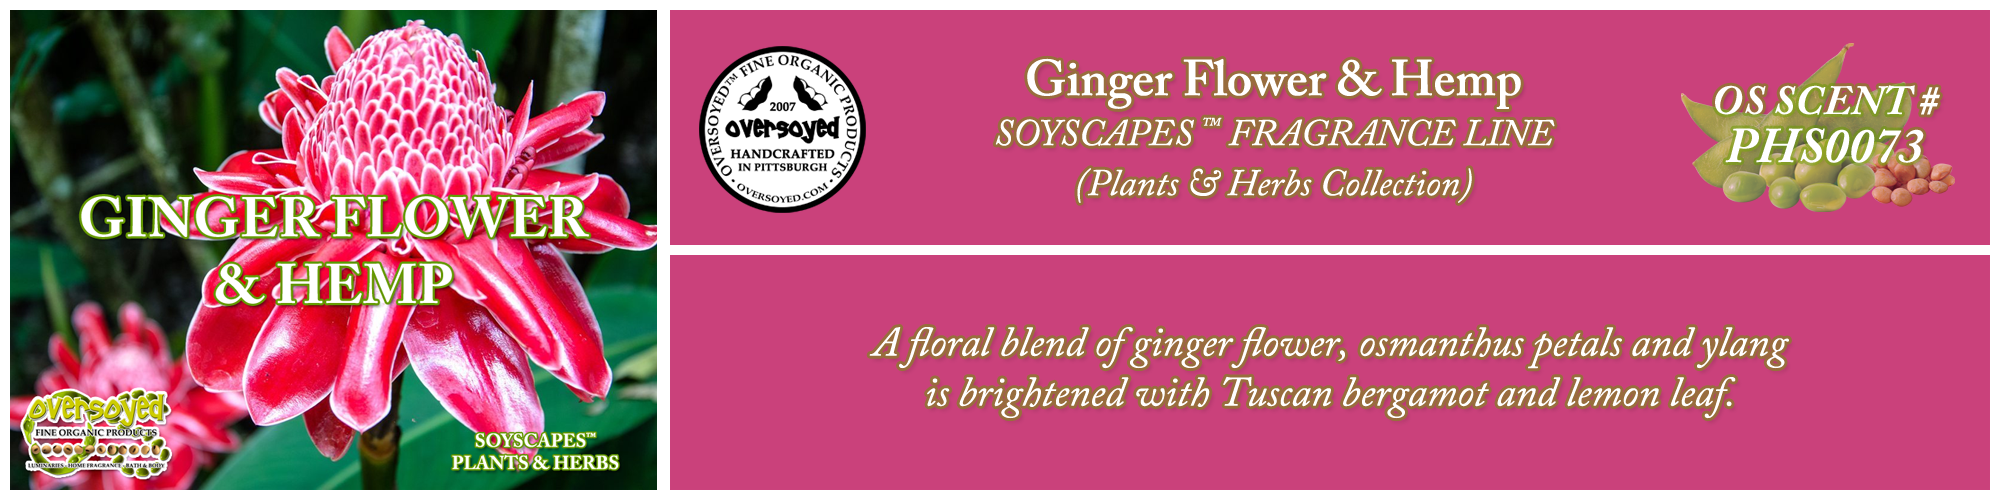 Ginger Flower & Hemp Handcrafted Products Collection